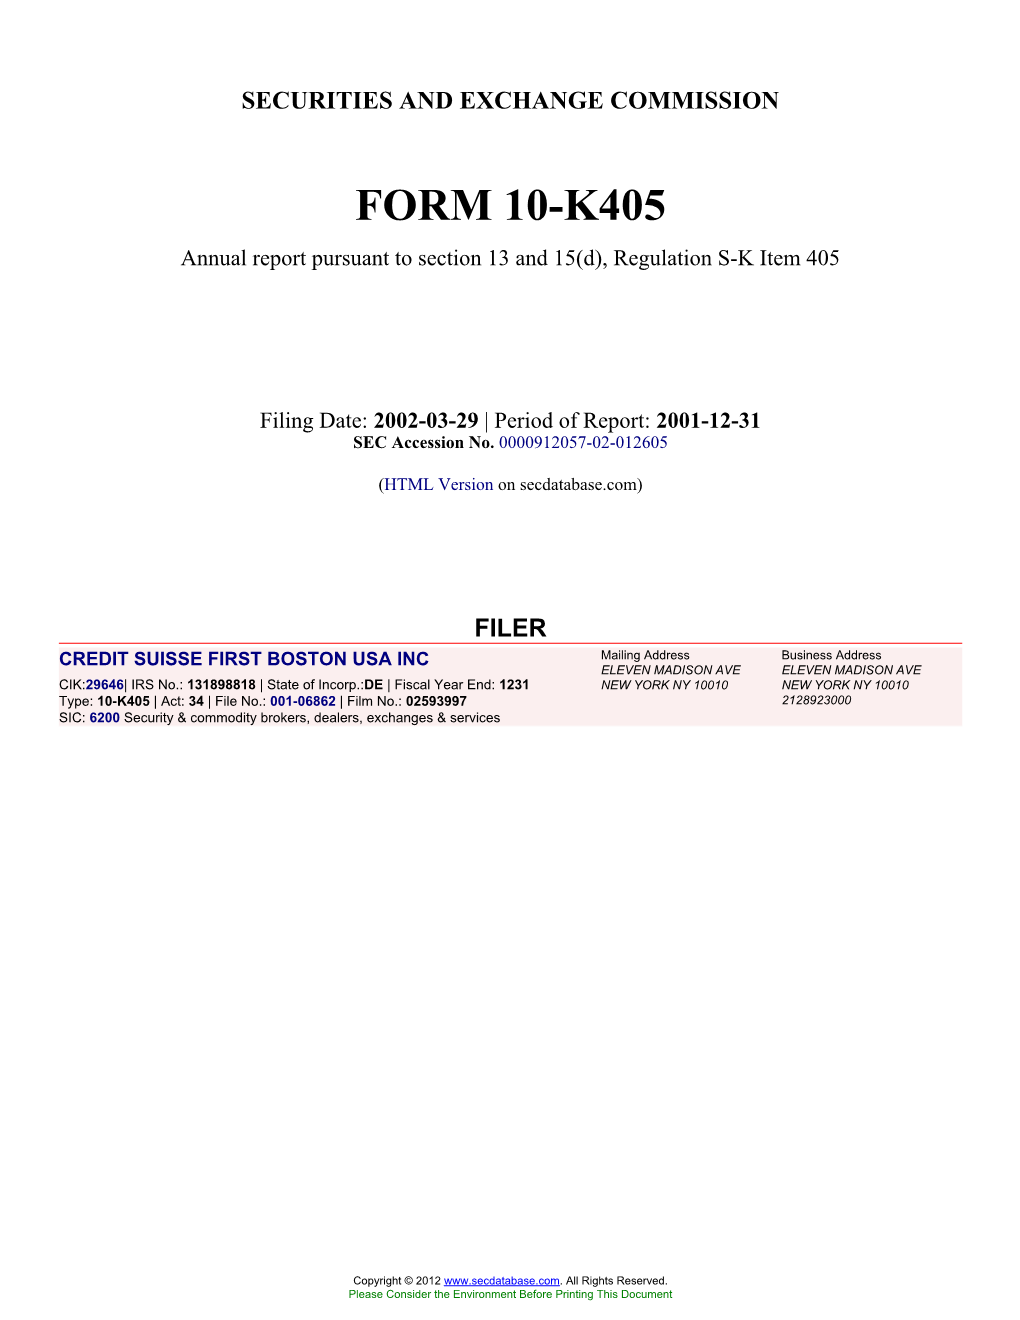 CREDIT SUISSE FIRST BOSTON USA INC (Form: 10-K405, Filing